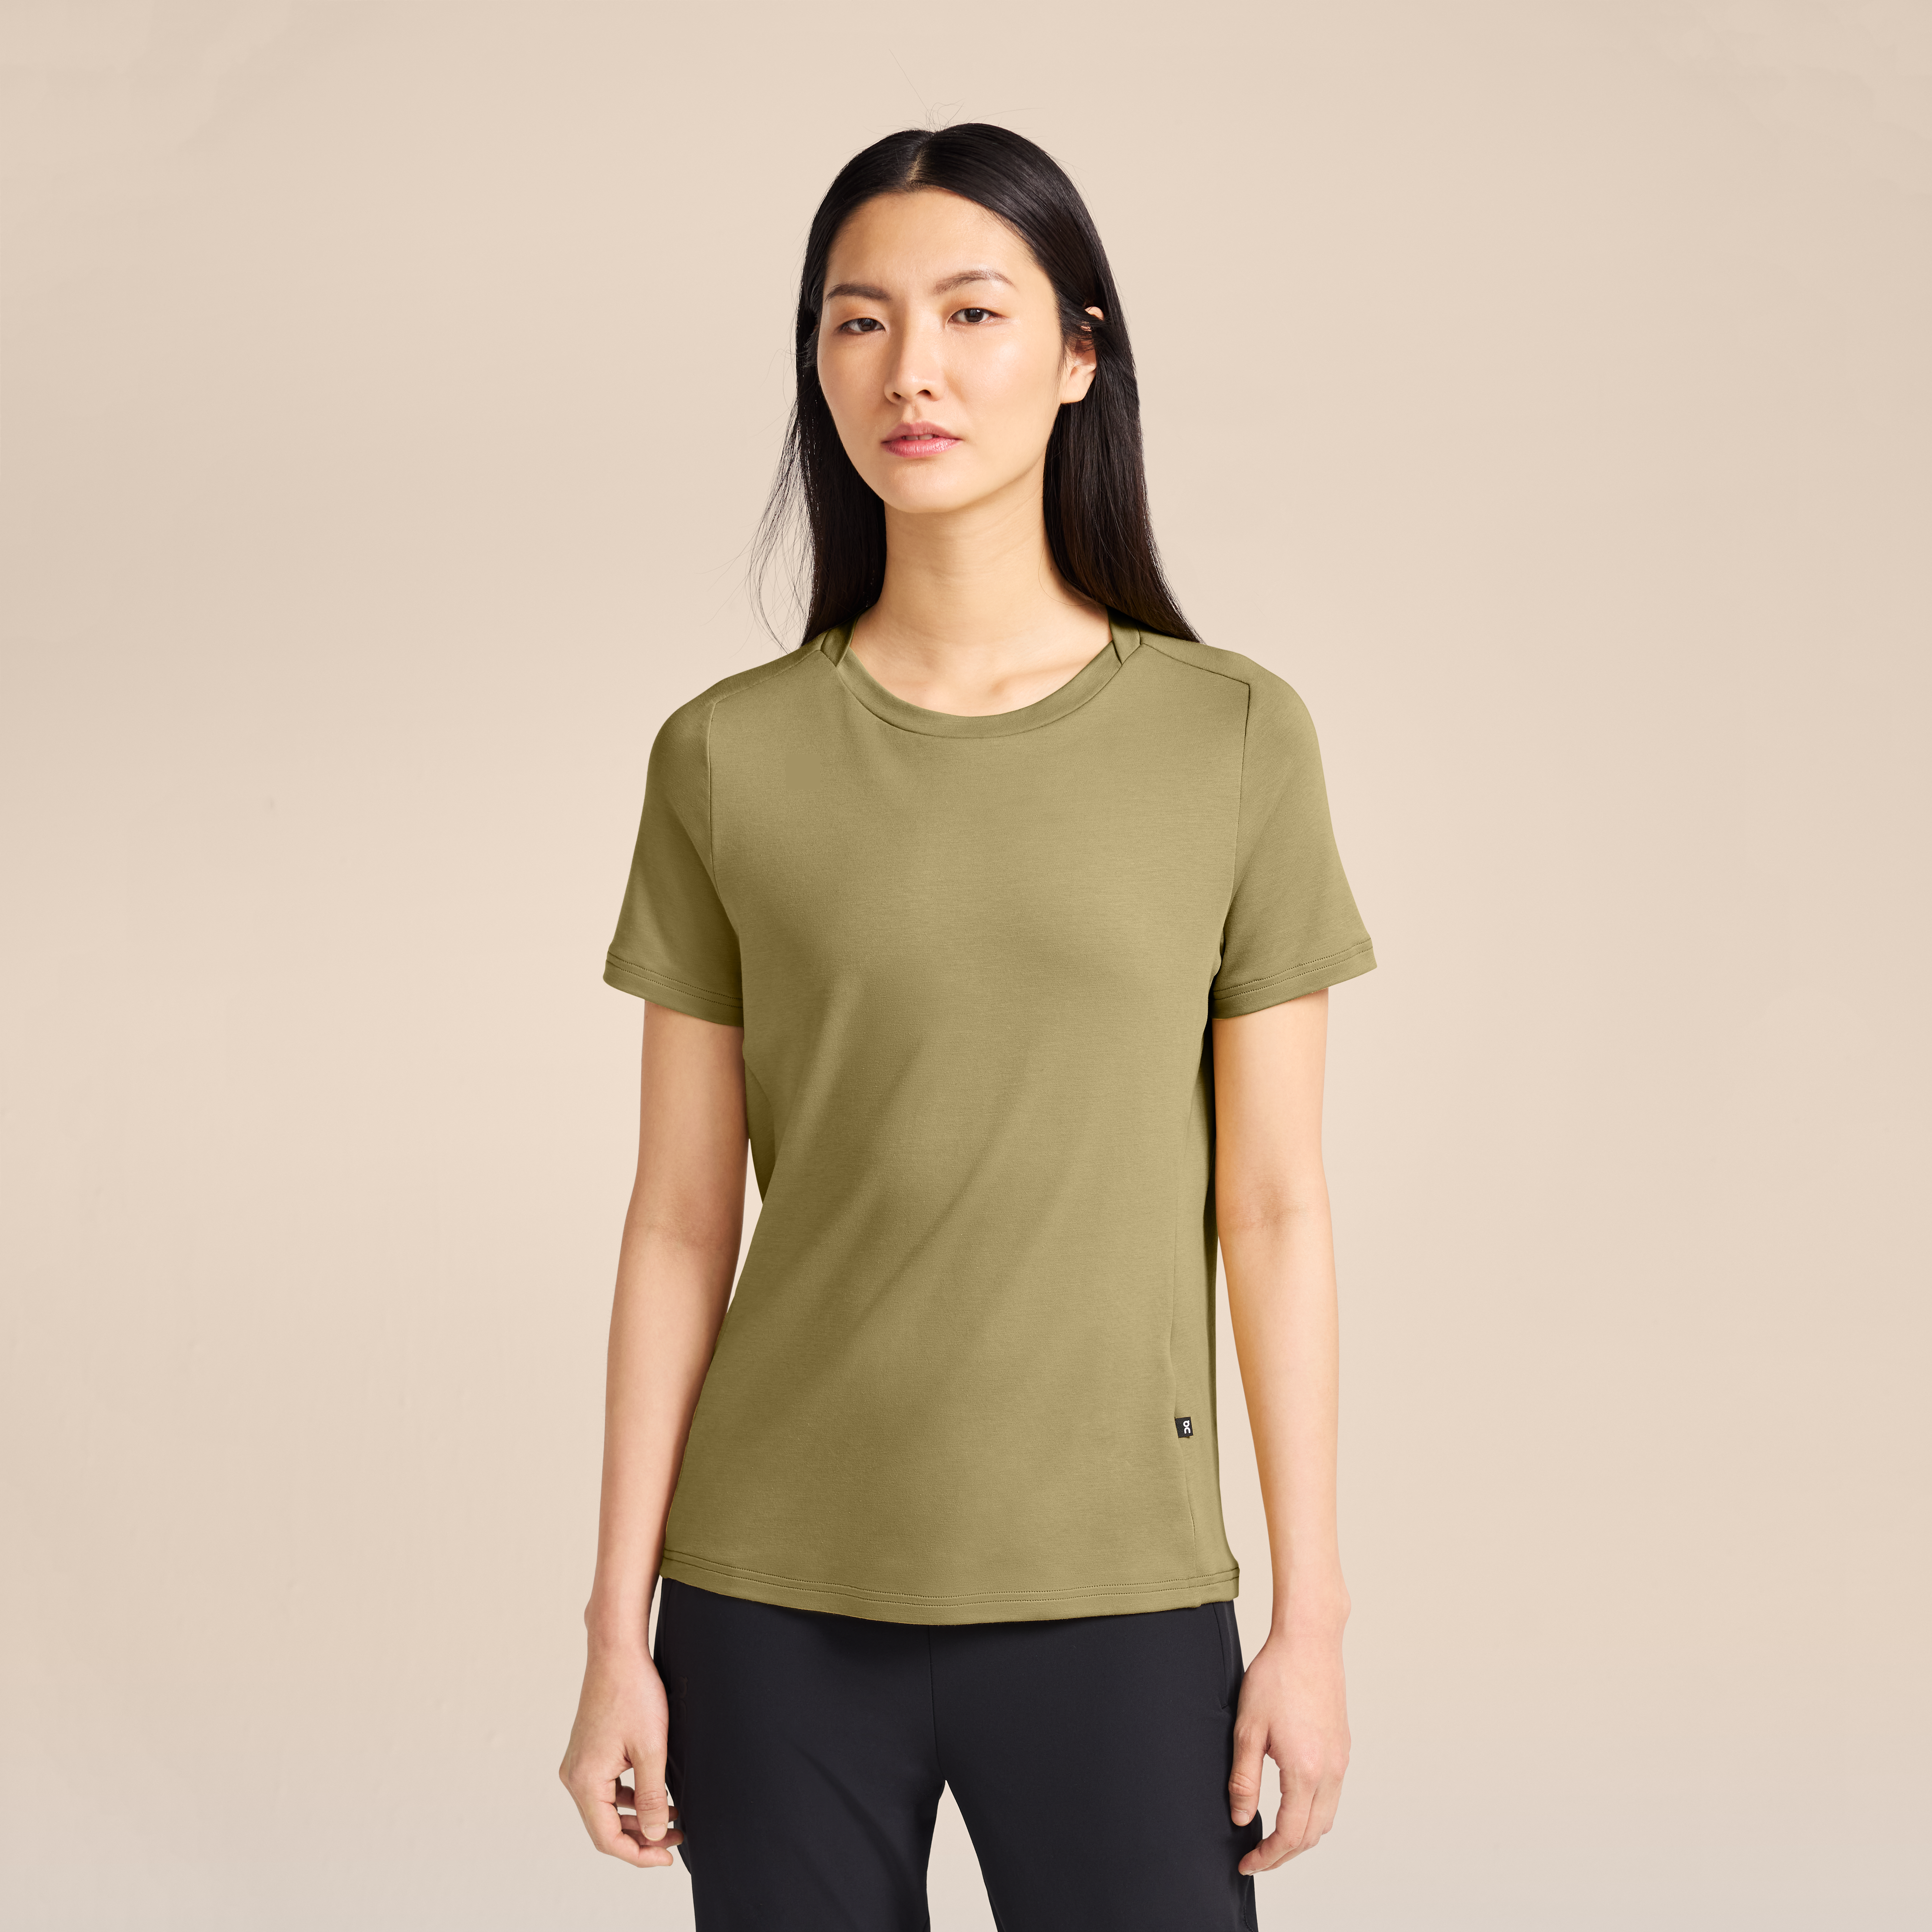 On Focus-T Green Women All-day wear, workouts, yoga Tops and t-shirts